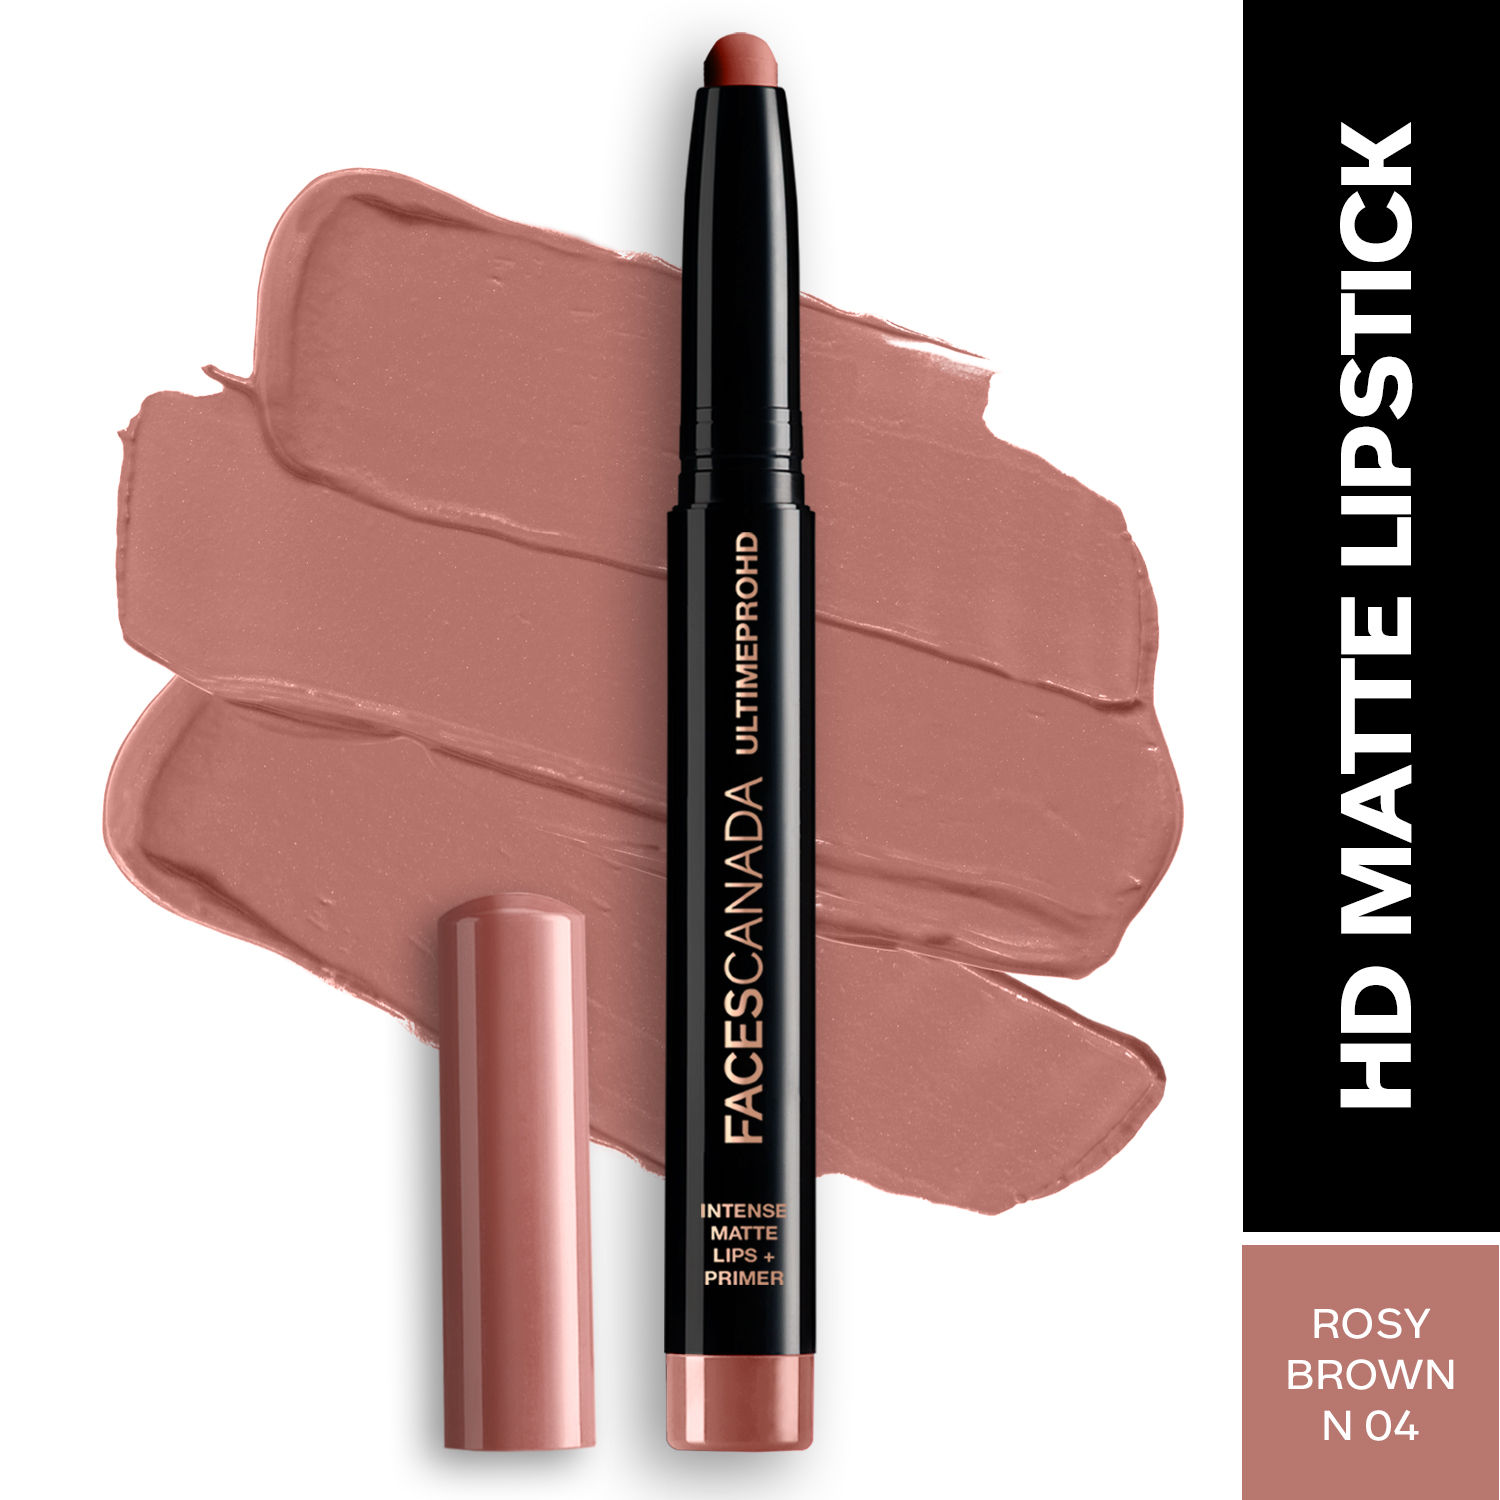 Buy FACES CANADA Ultime Pro HD Intense Matte Lipstick + Primer - Rosy Brown, 1.4g | 9HR Long Stay | Feather-Light Comfort | Intense Color | Smooth Glide - Purplle